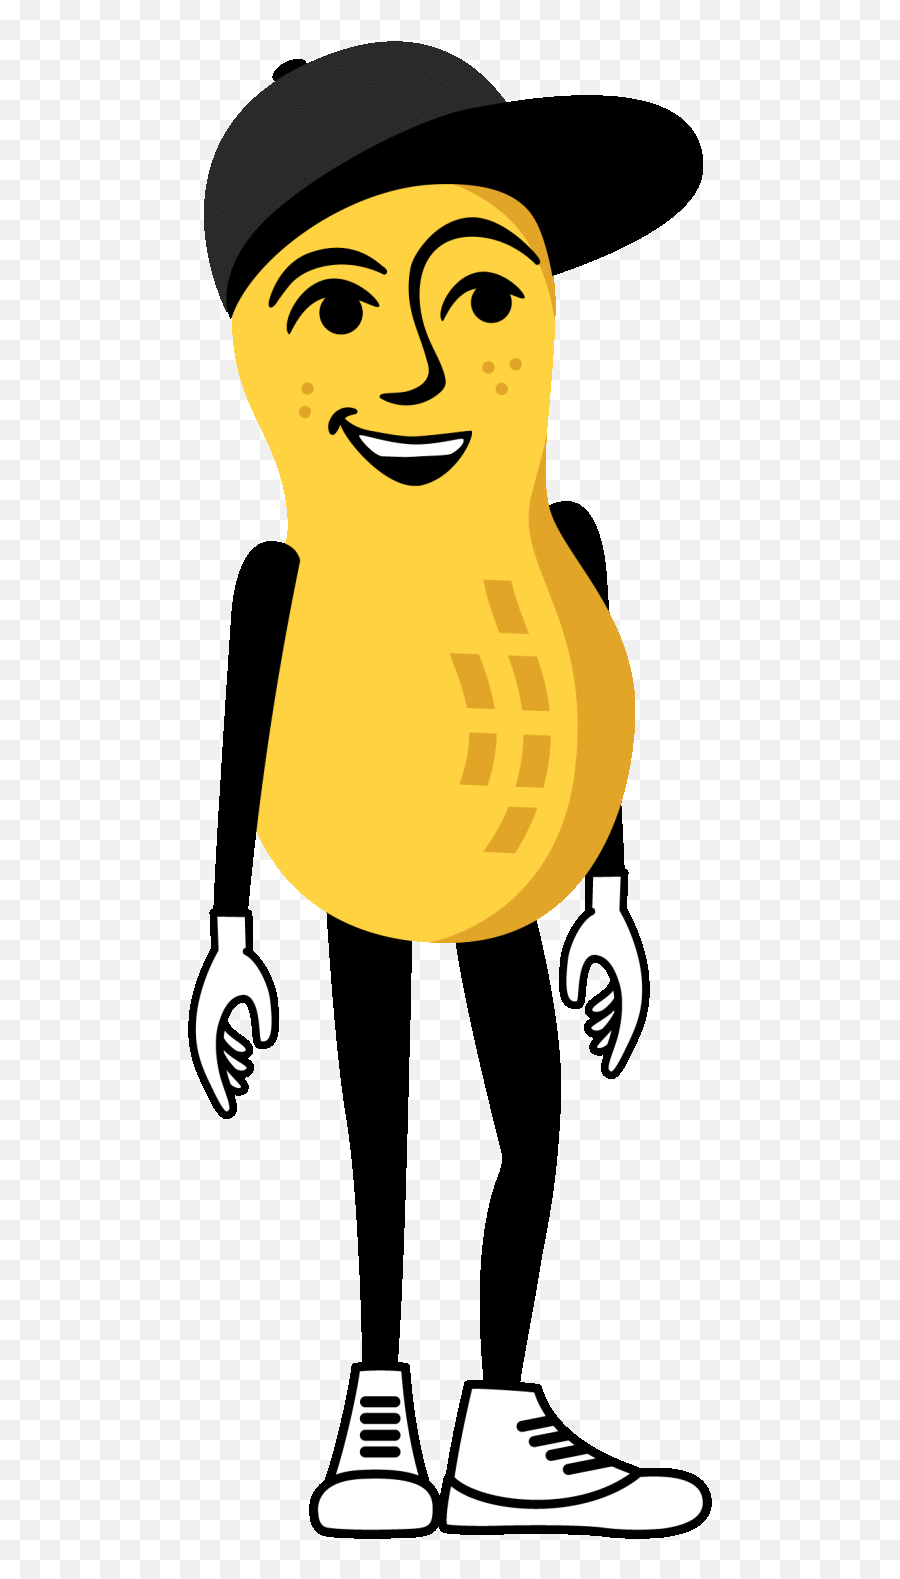 Dance Dancing Sticker By Mr Peanut For Ios Android Giphy Man - Mr Peanut Gif Emoji,Dancing Emoji For Iphone